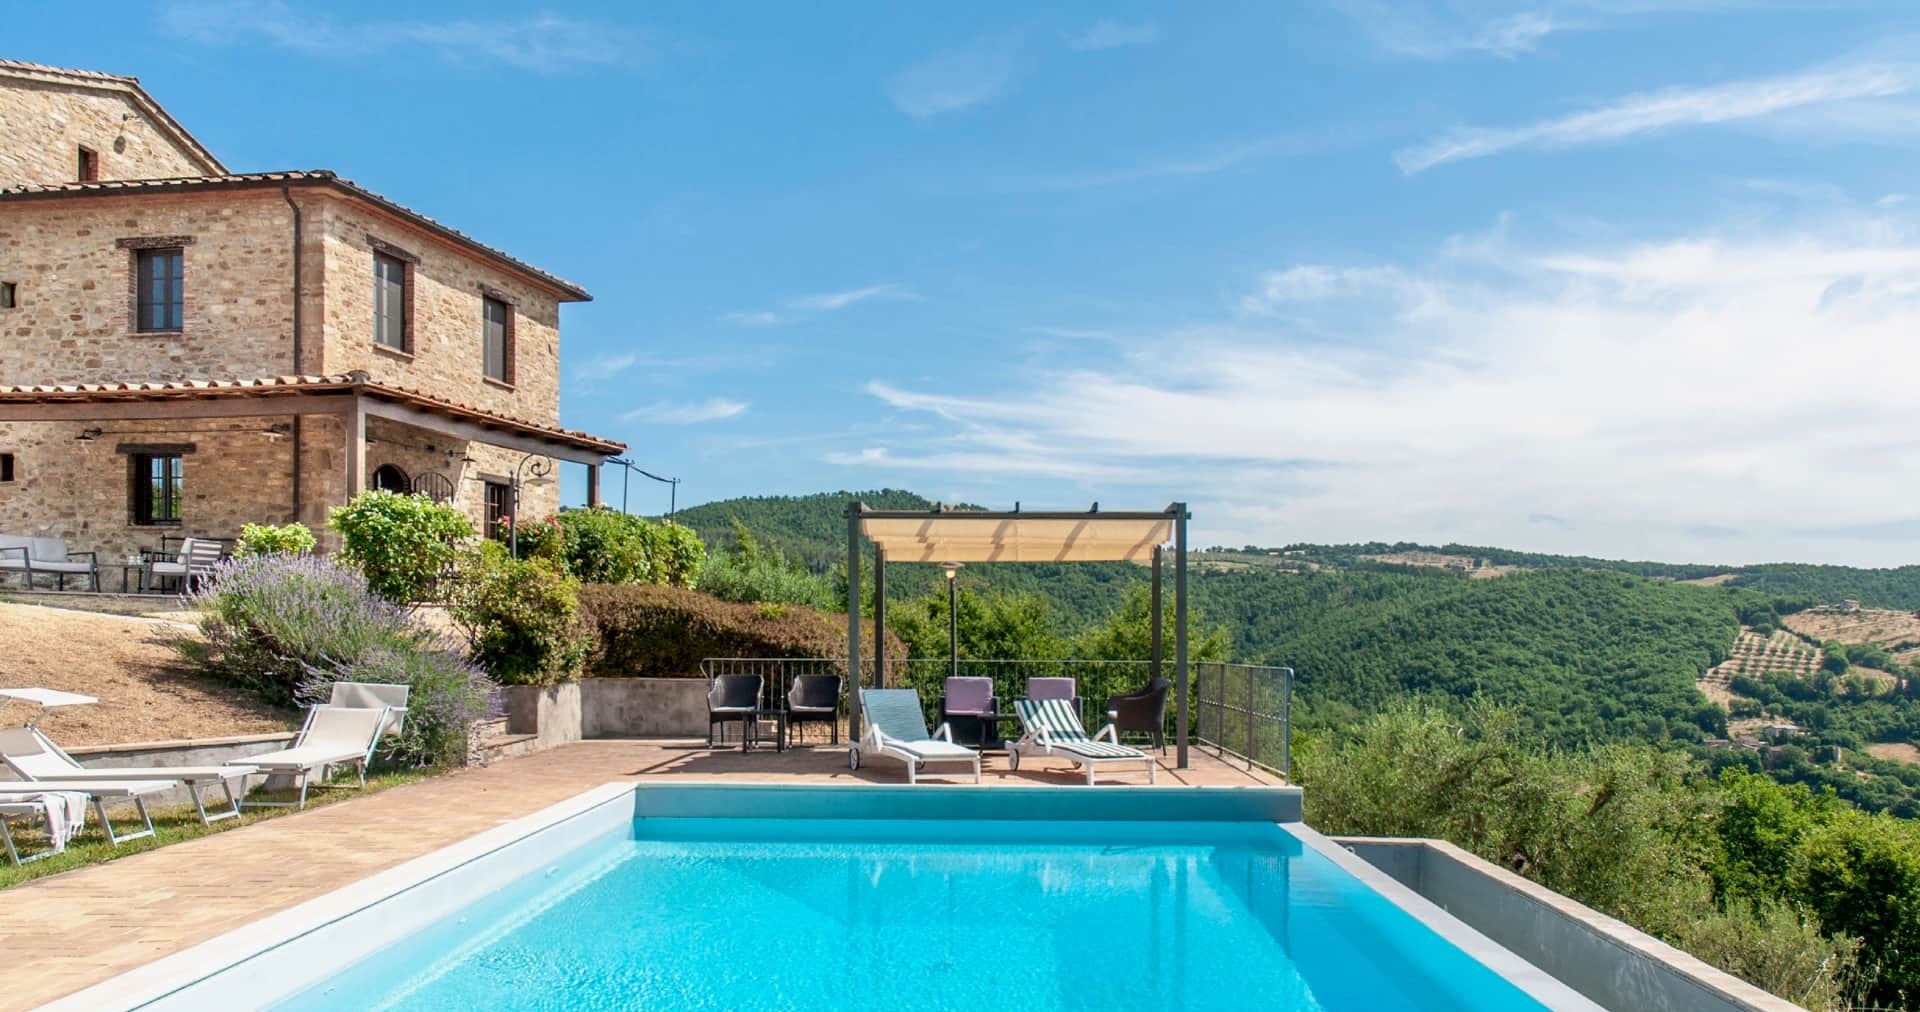 Buying a house in Le Marche?